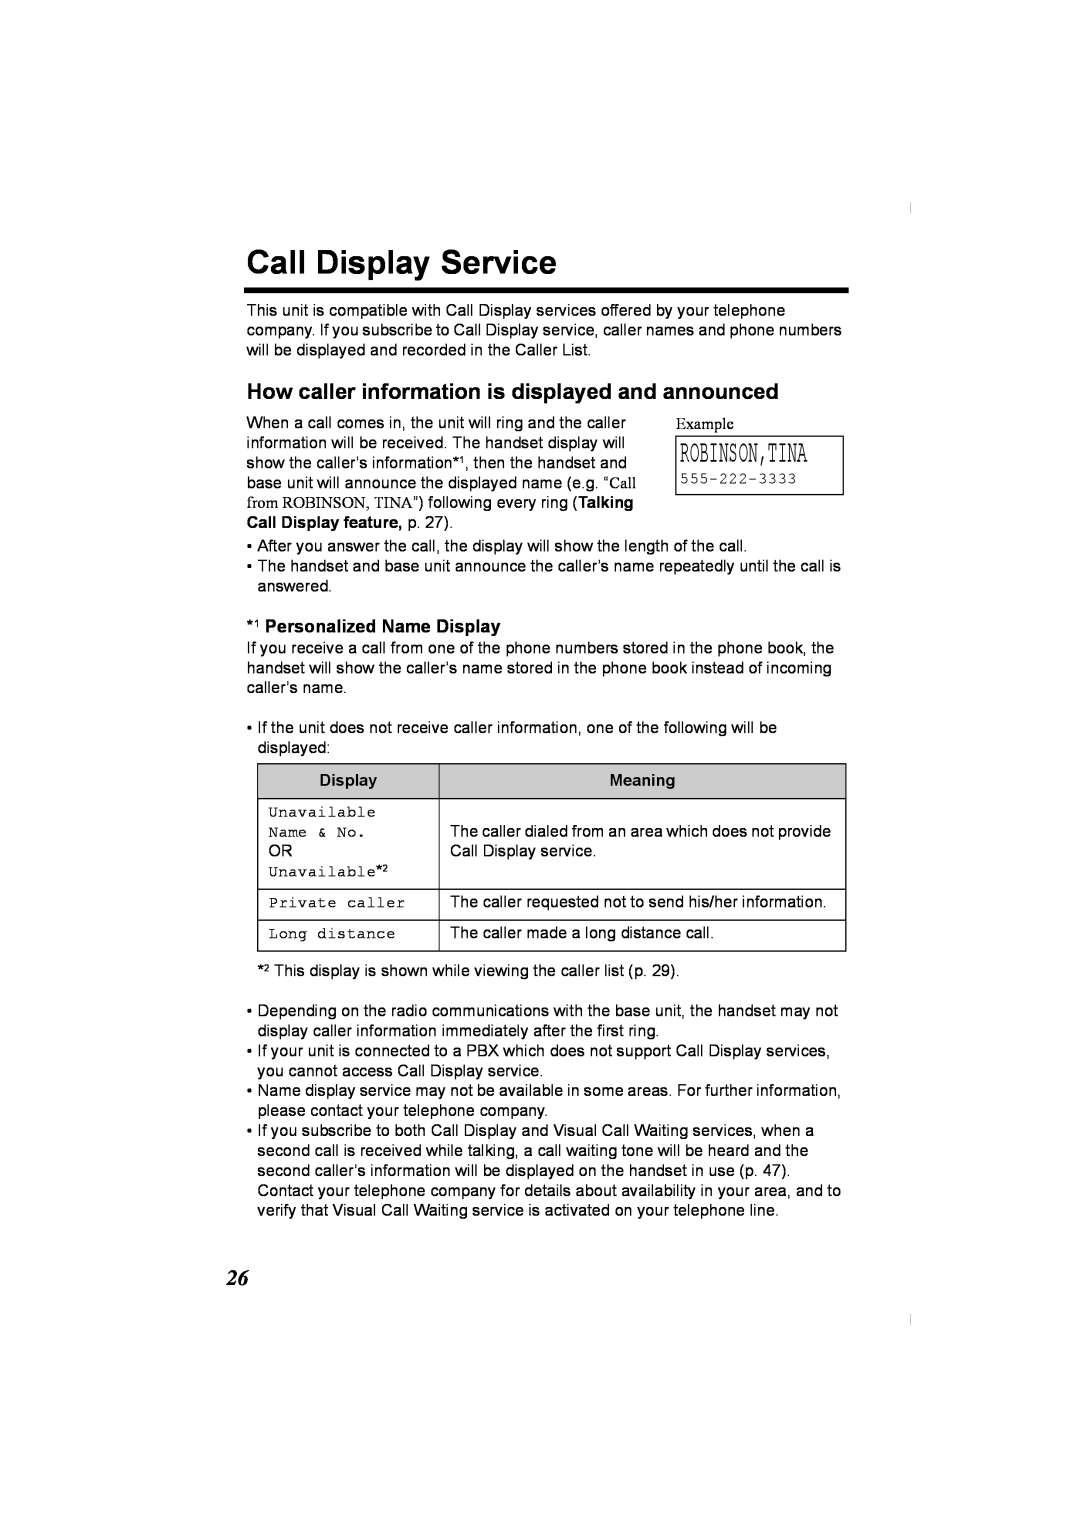 Panasonic KX-TG2336C Call Display Service, Robinson,Tina, How caller information is displayed and announced, Meaning 